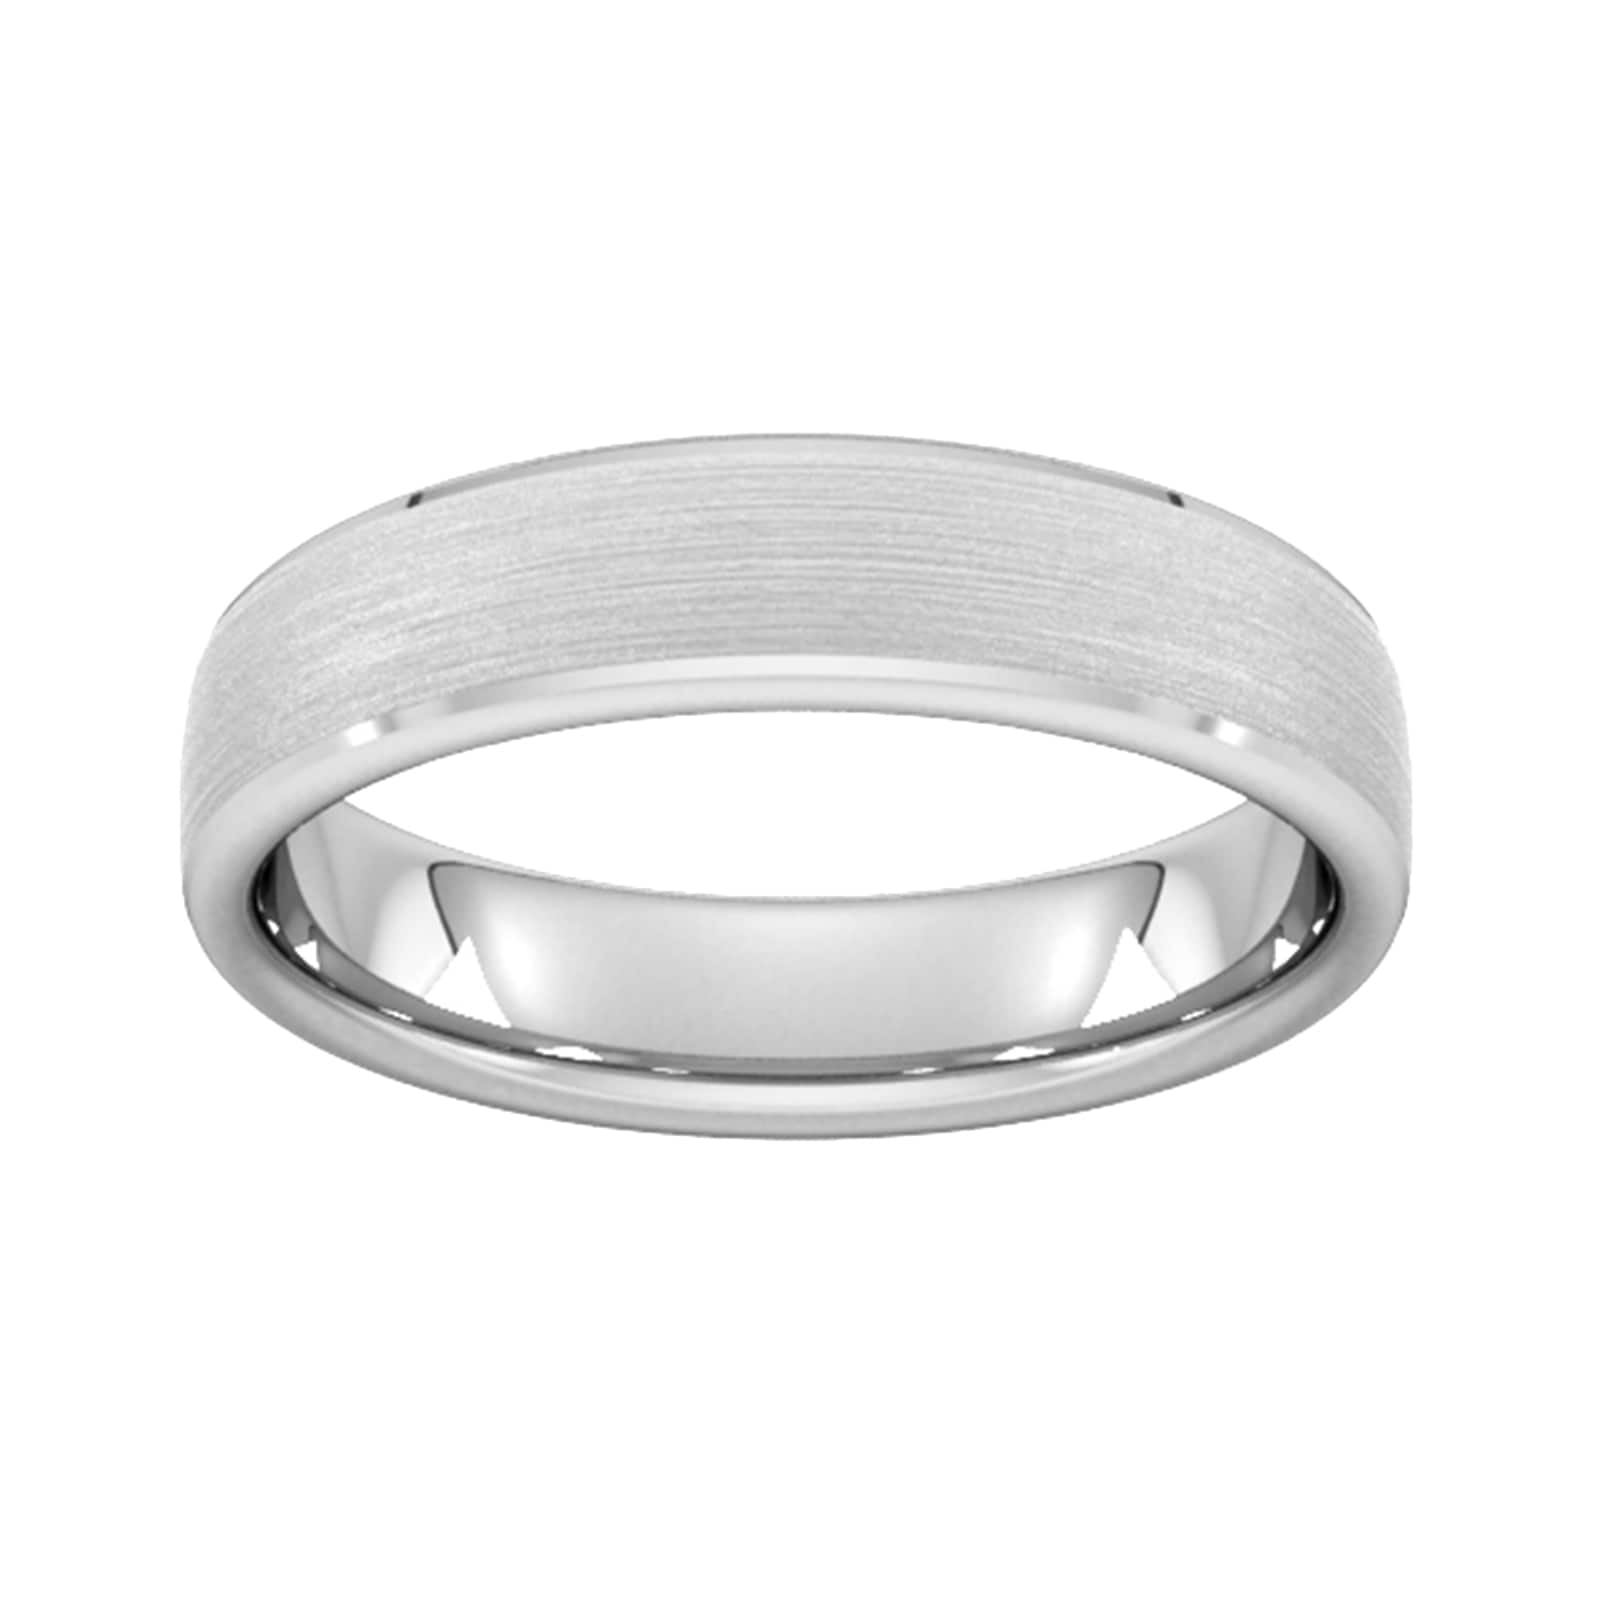 5mm D Shape Heavy Polished Chamfered Edges With Matt Centre Wedding Ring In 950 Palladium - Ring Size L